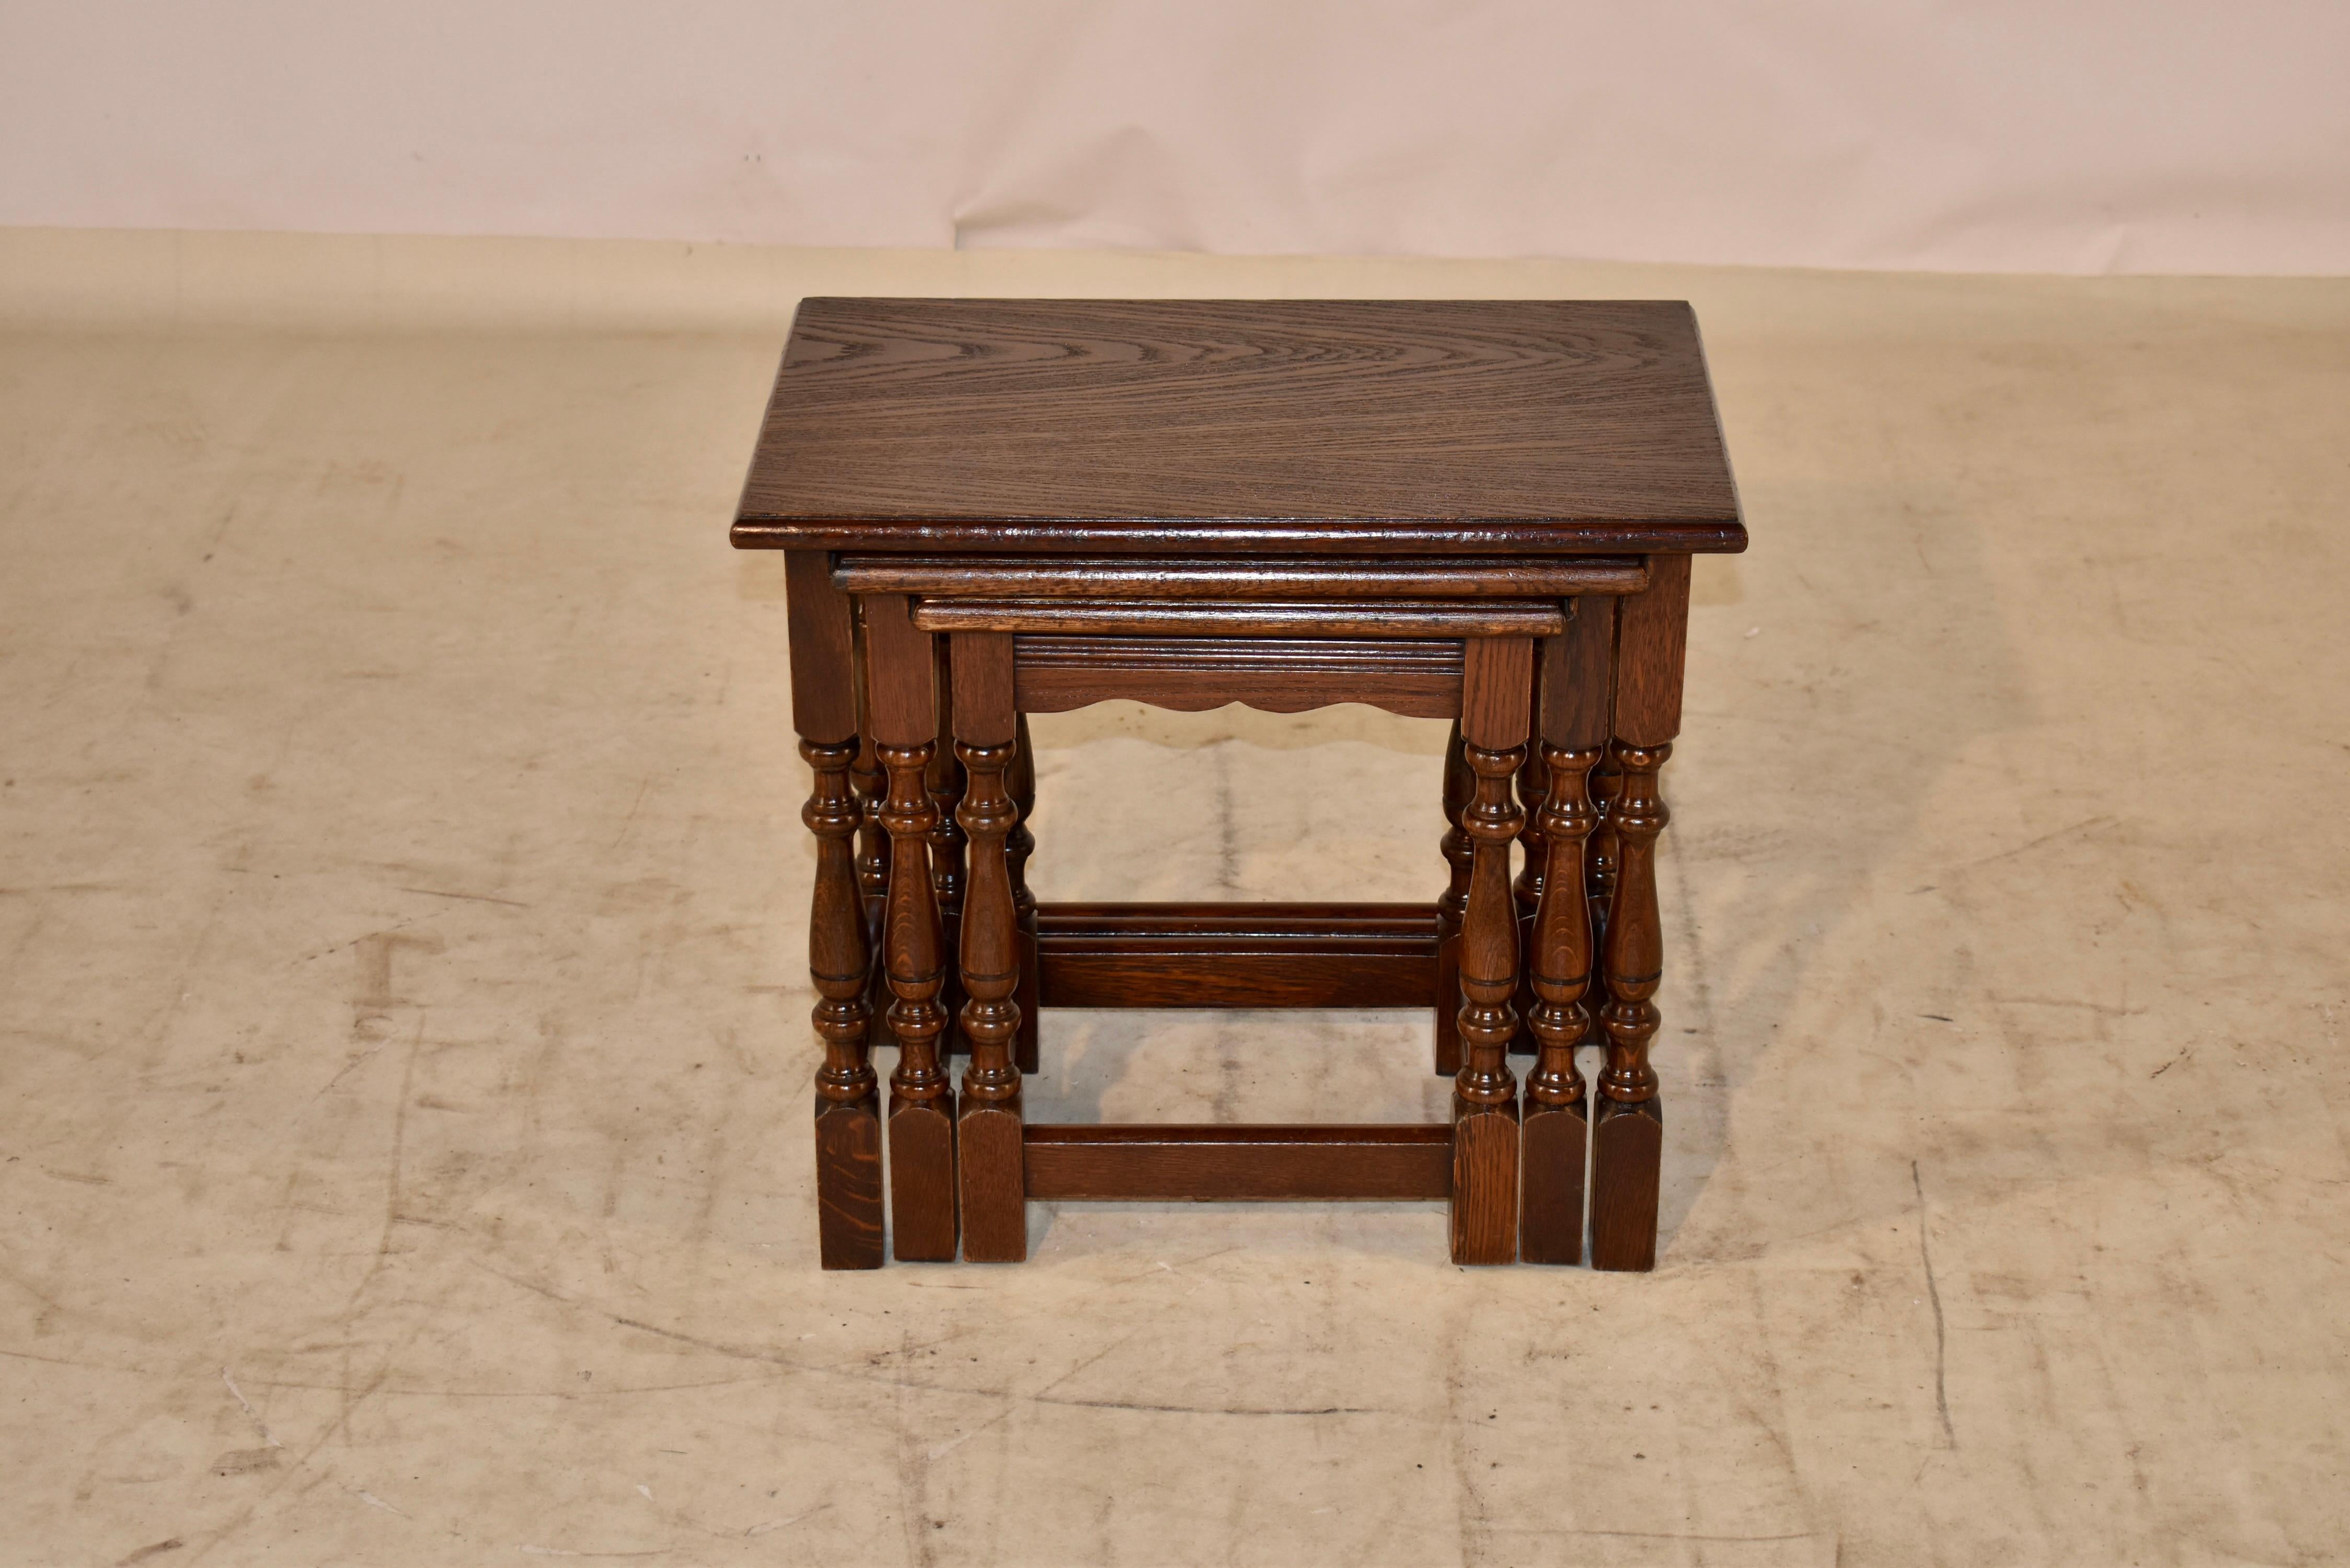 Set of three nesting oak side tables from England. Tops of the tables have beveled edges, following down to simple aprons with channeled decoration and supported on hand turned legs, joined by simple stretchers. The small table measures 13.13 w x